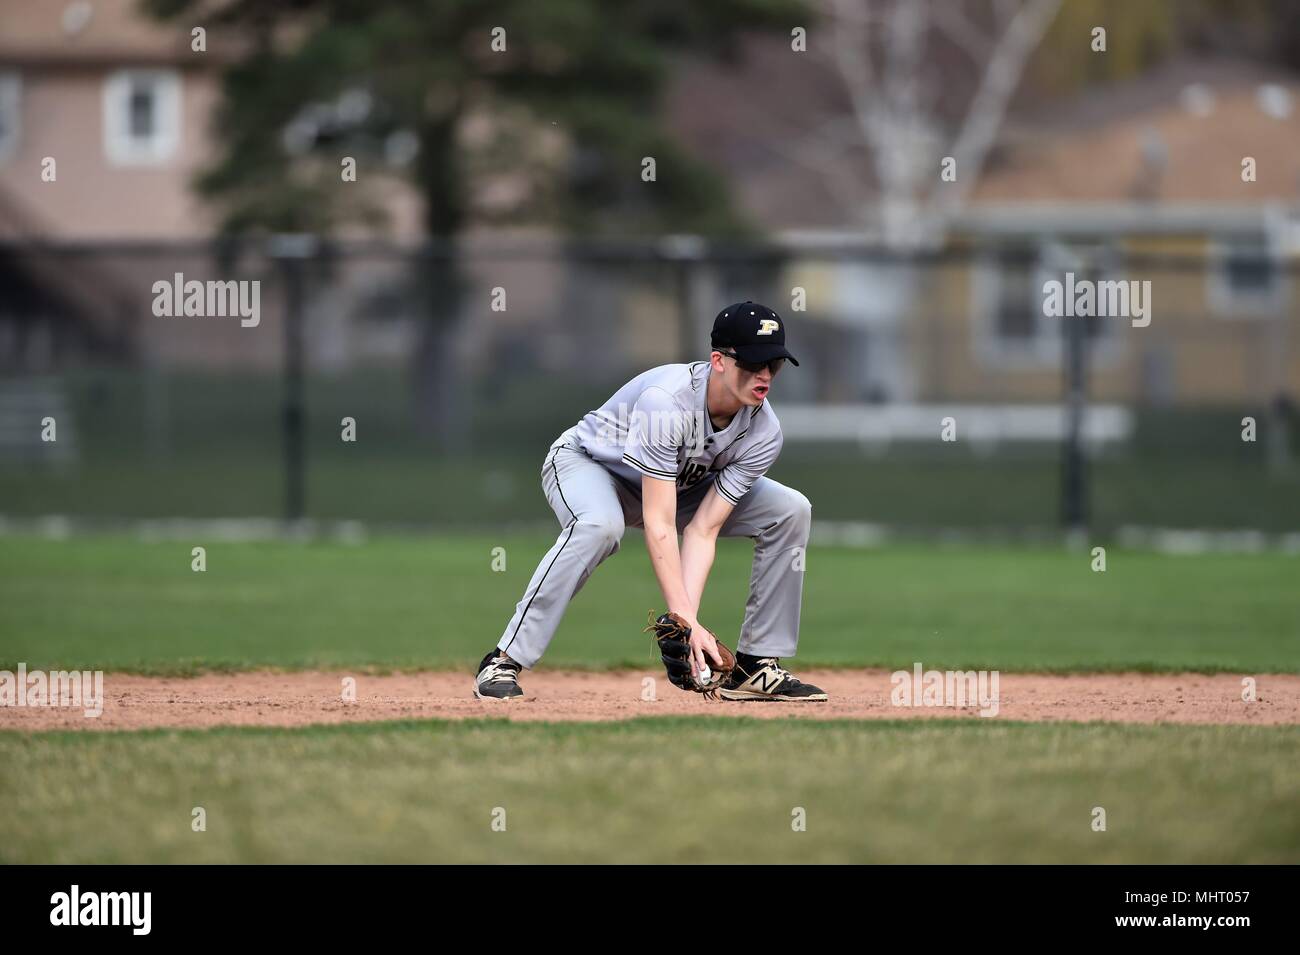 Second baseman fielding a ground ball prior to throwing on to first bsee to retire the batter. USA. Stock Photo